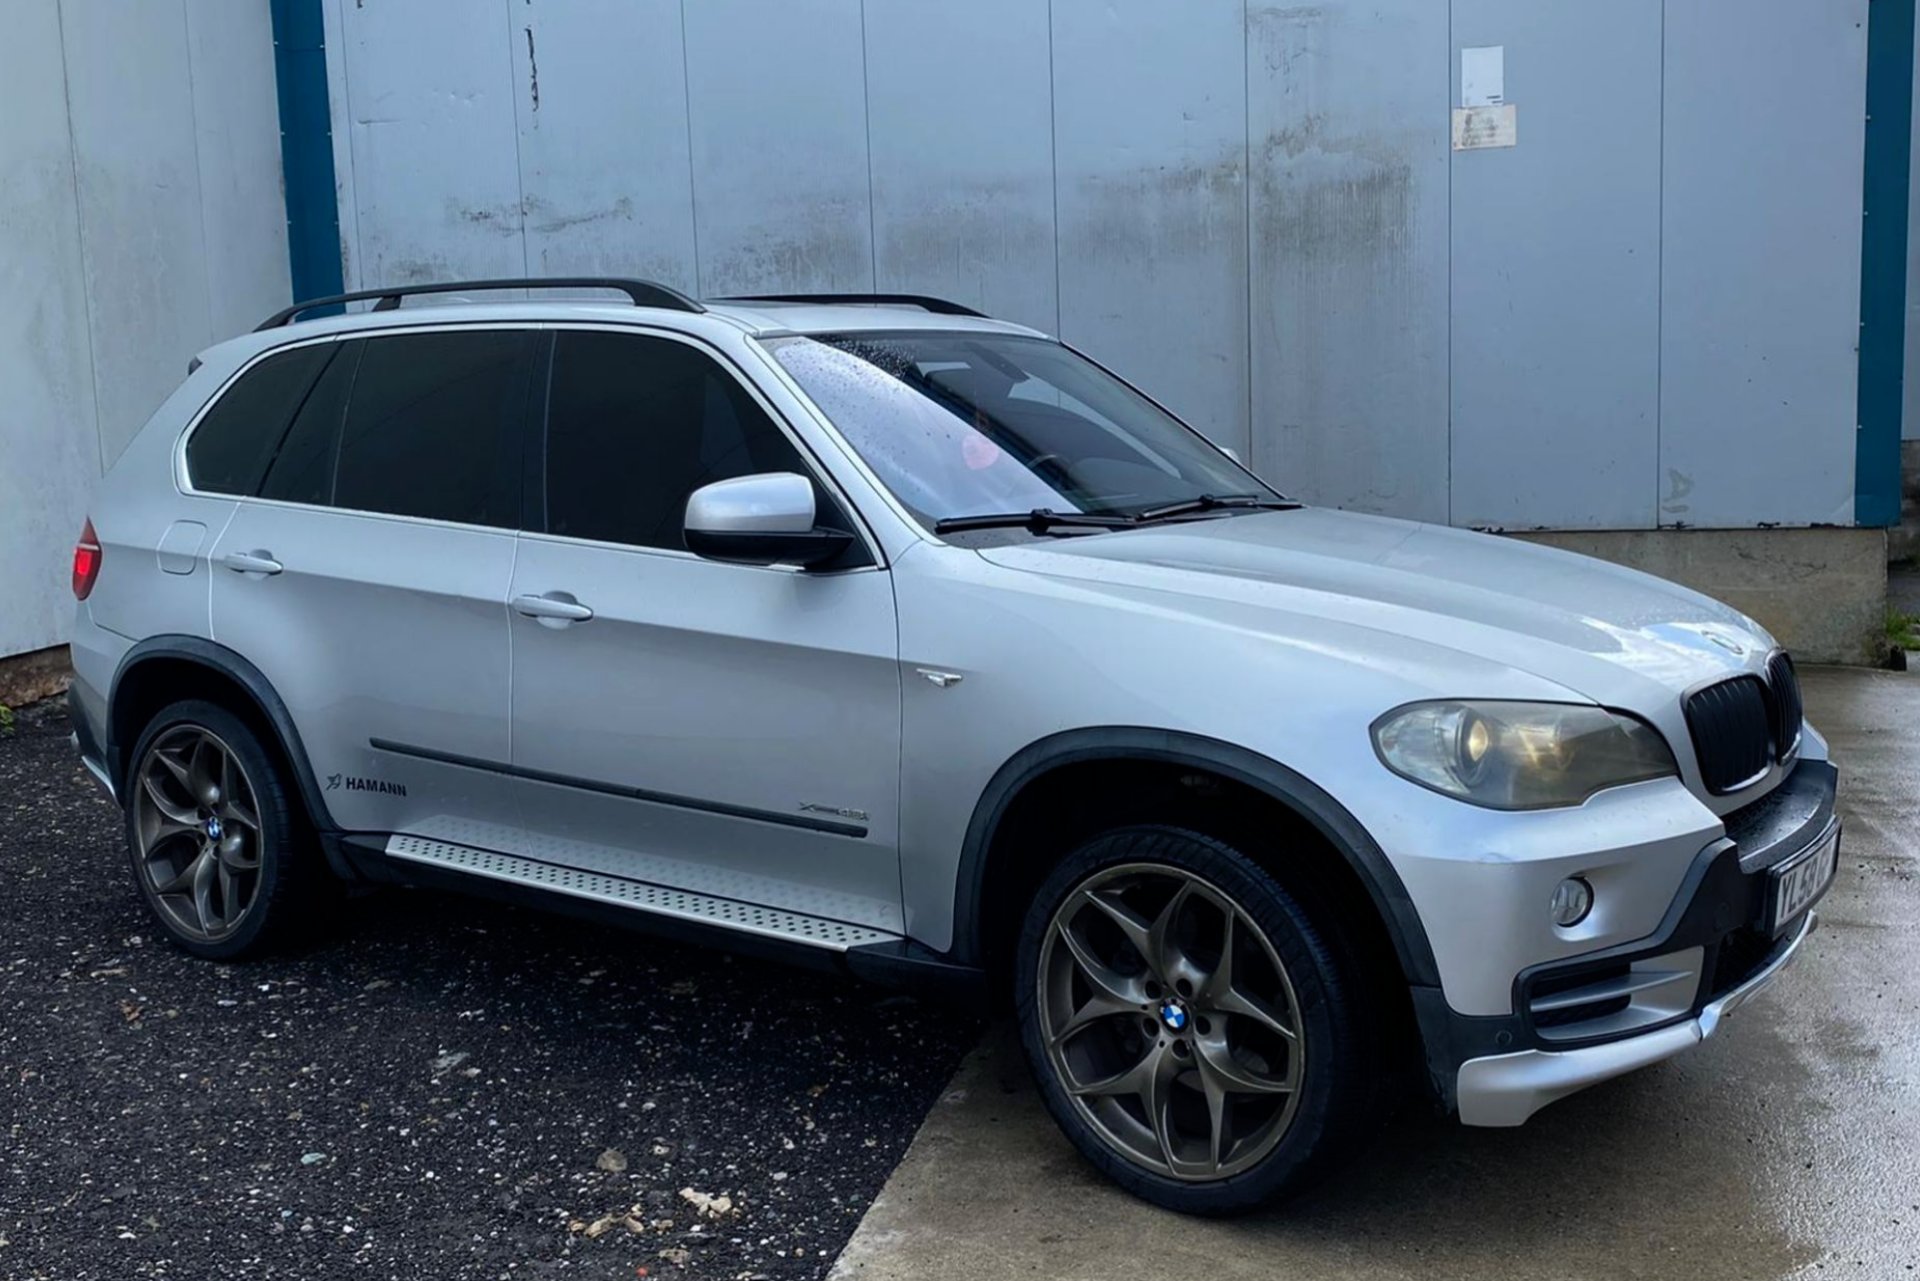 2009/58 REG BMW X5 4.8L PETROL AUTOMATIC SILVER, SHOWING 1 FORMER KEEPER - LEFT HAND DRIVE *NO VAT*